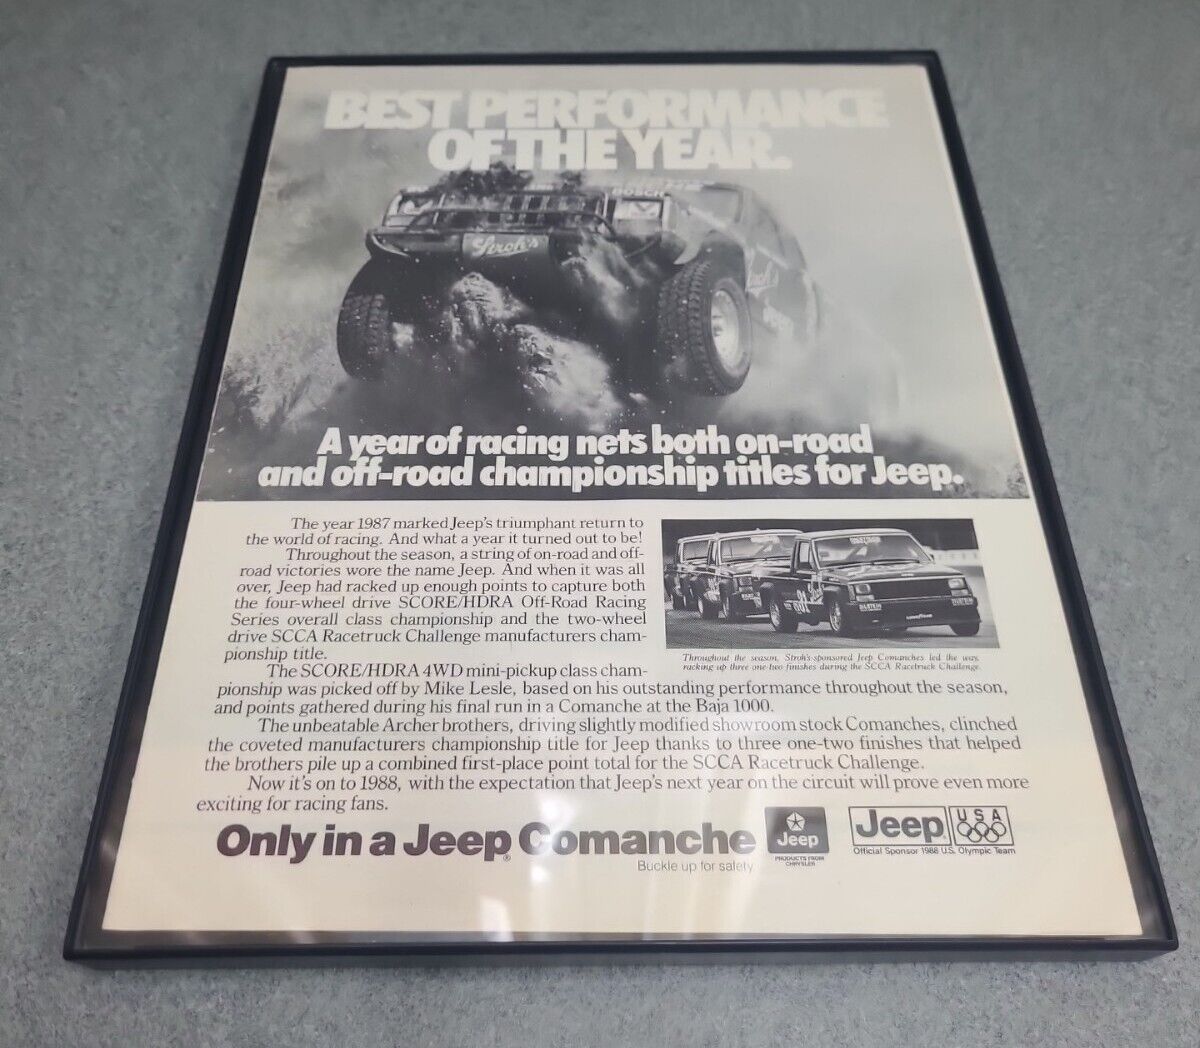 1987 Jeep Comanche  Best Performance Of The Year Off Road Print Ad Framed 8.5x11